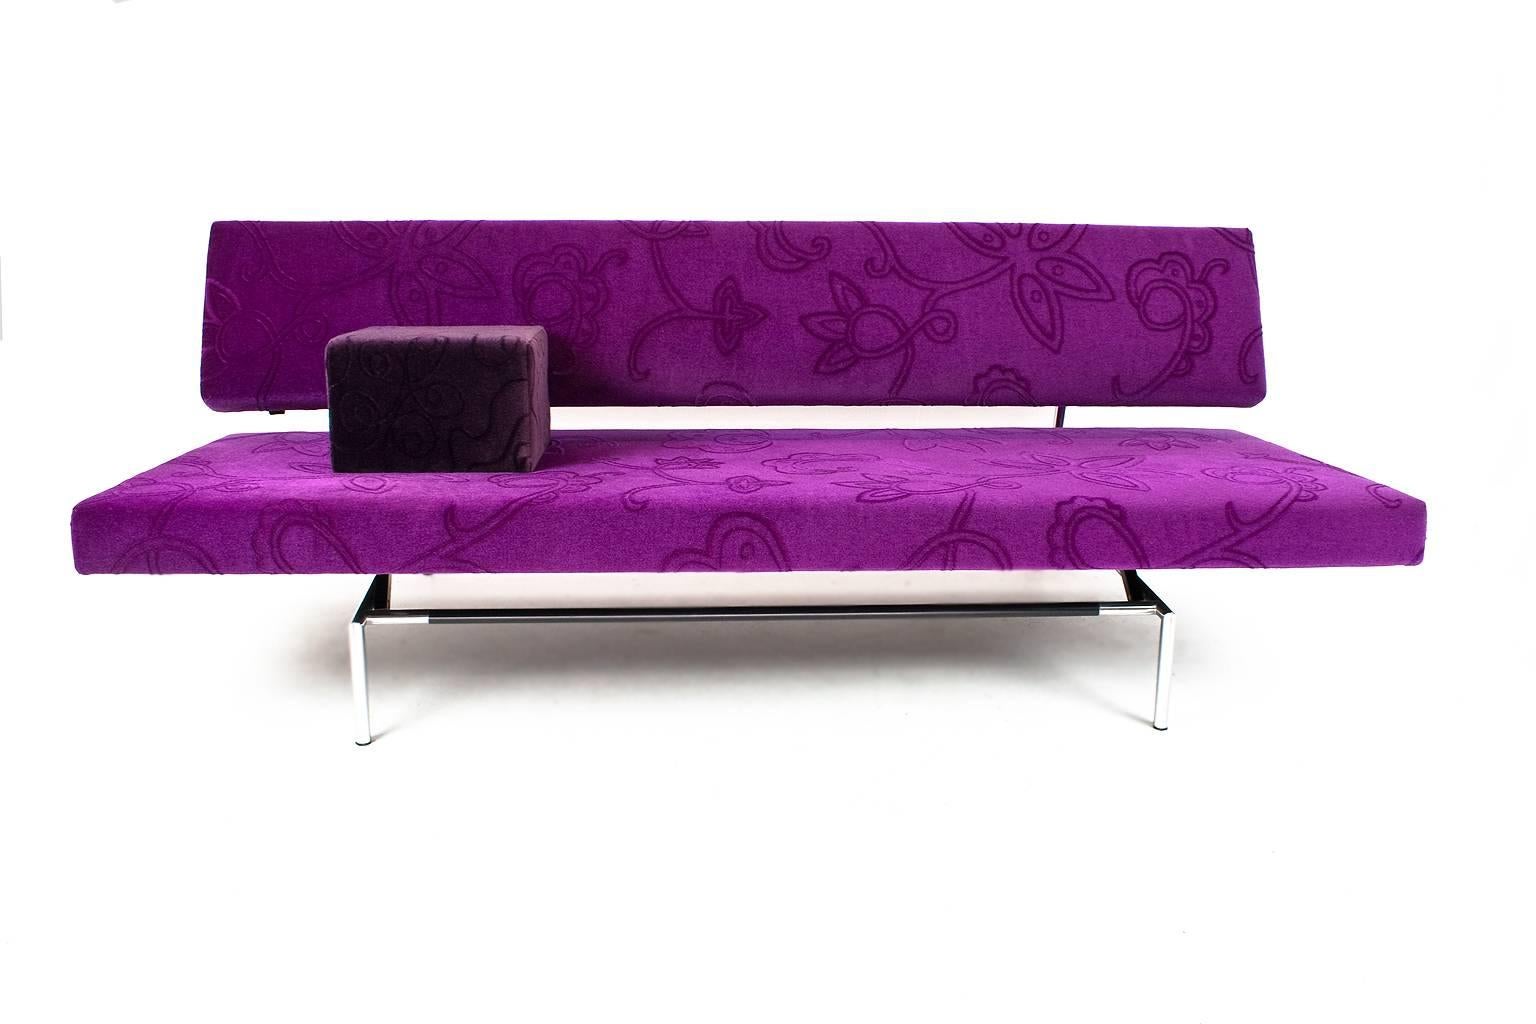 Sofa daybed BR02 designed by Martin Visser in 1960 and produced by Spectrum, Bergeijk (NL) in a limited edition upholstery. The design has become a Dutch icon, and through the years Spectrum has picked up the production again.

The piece is in